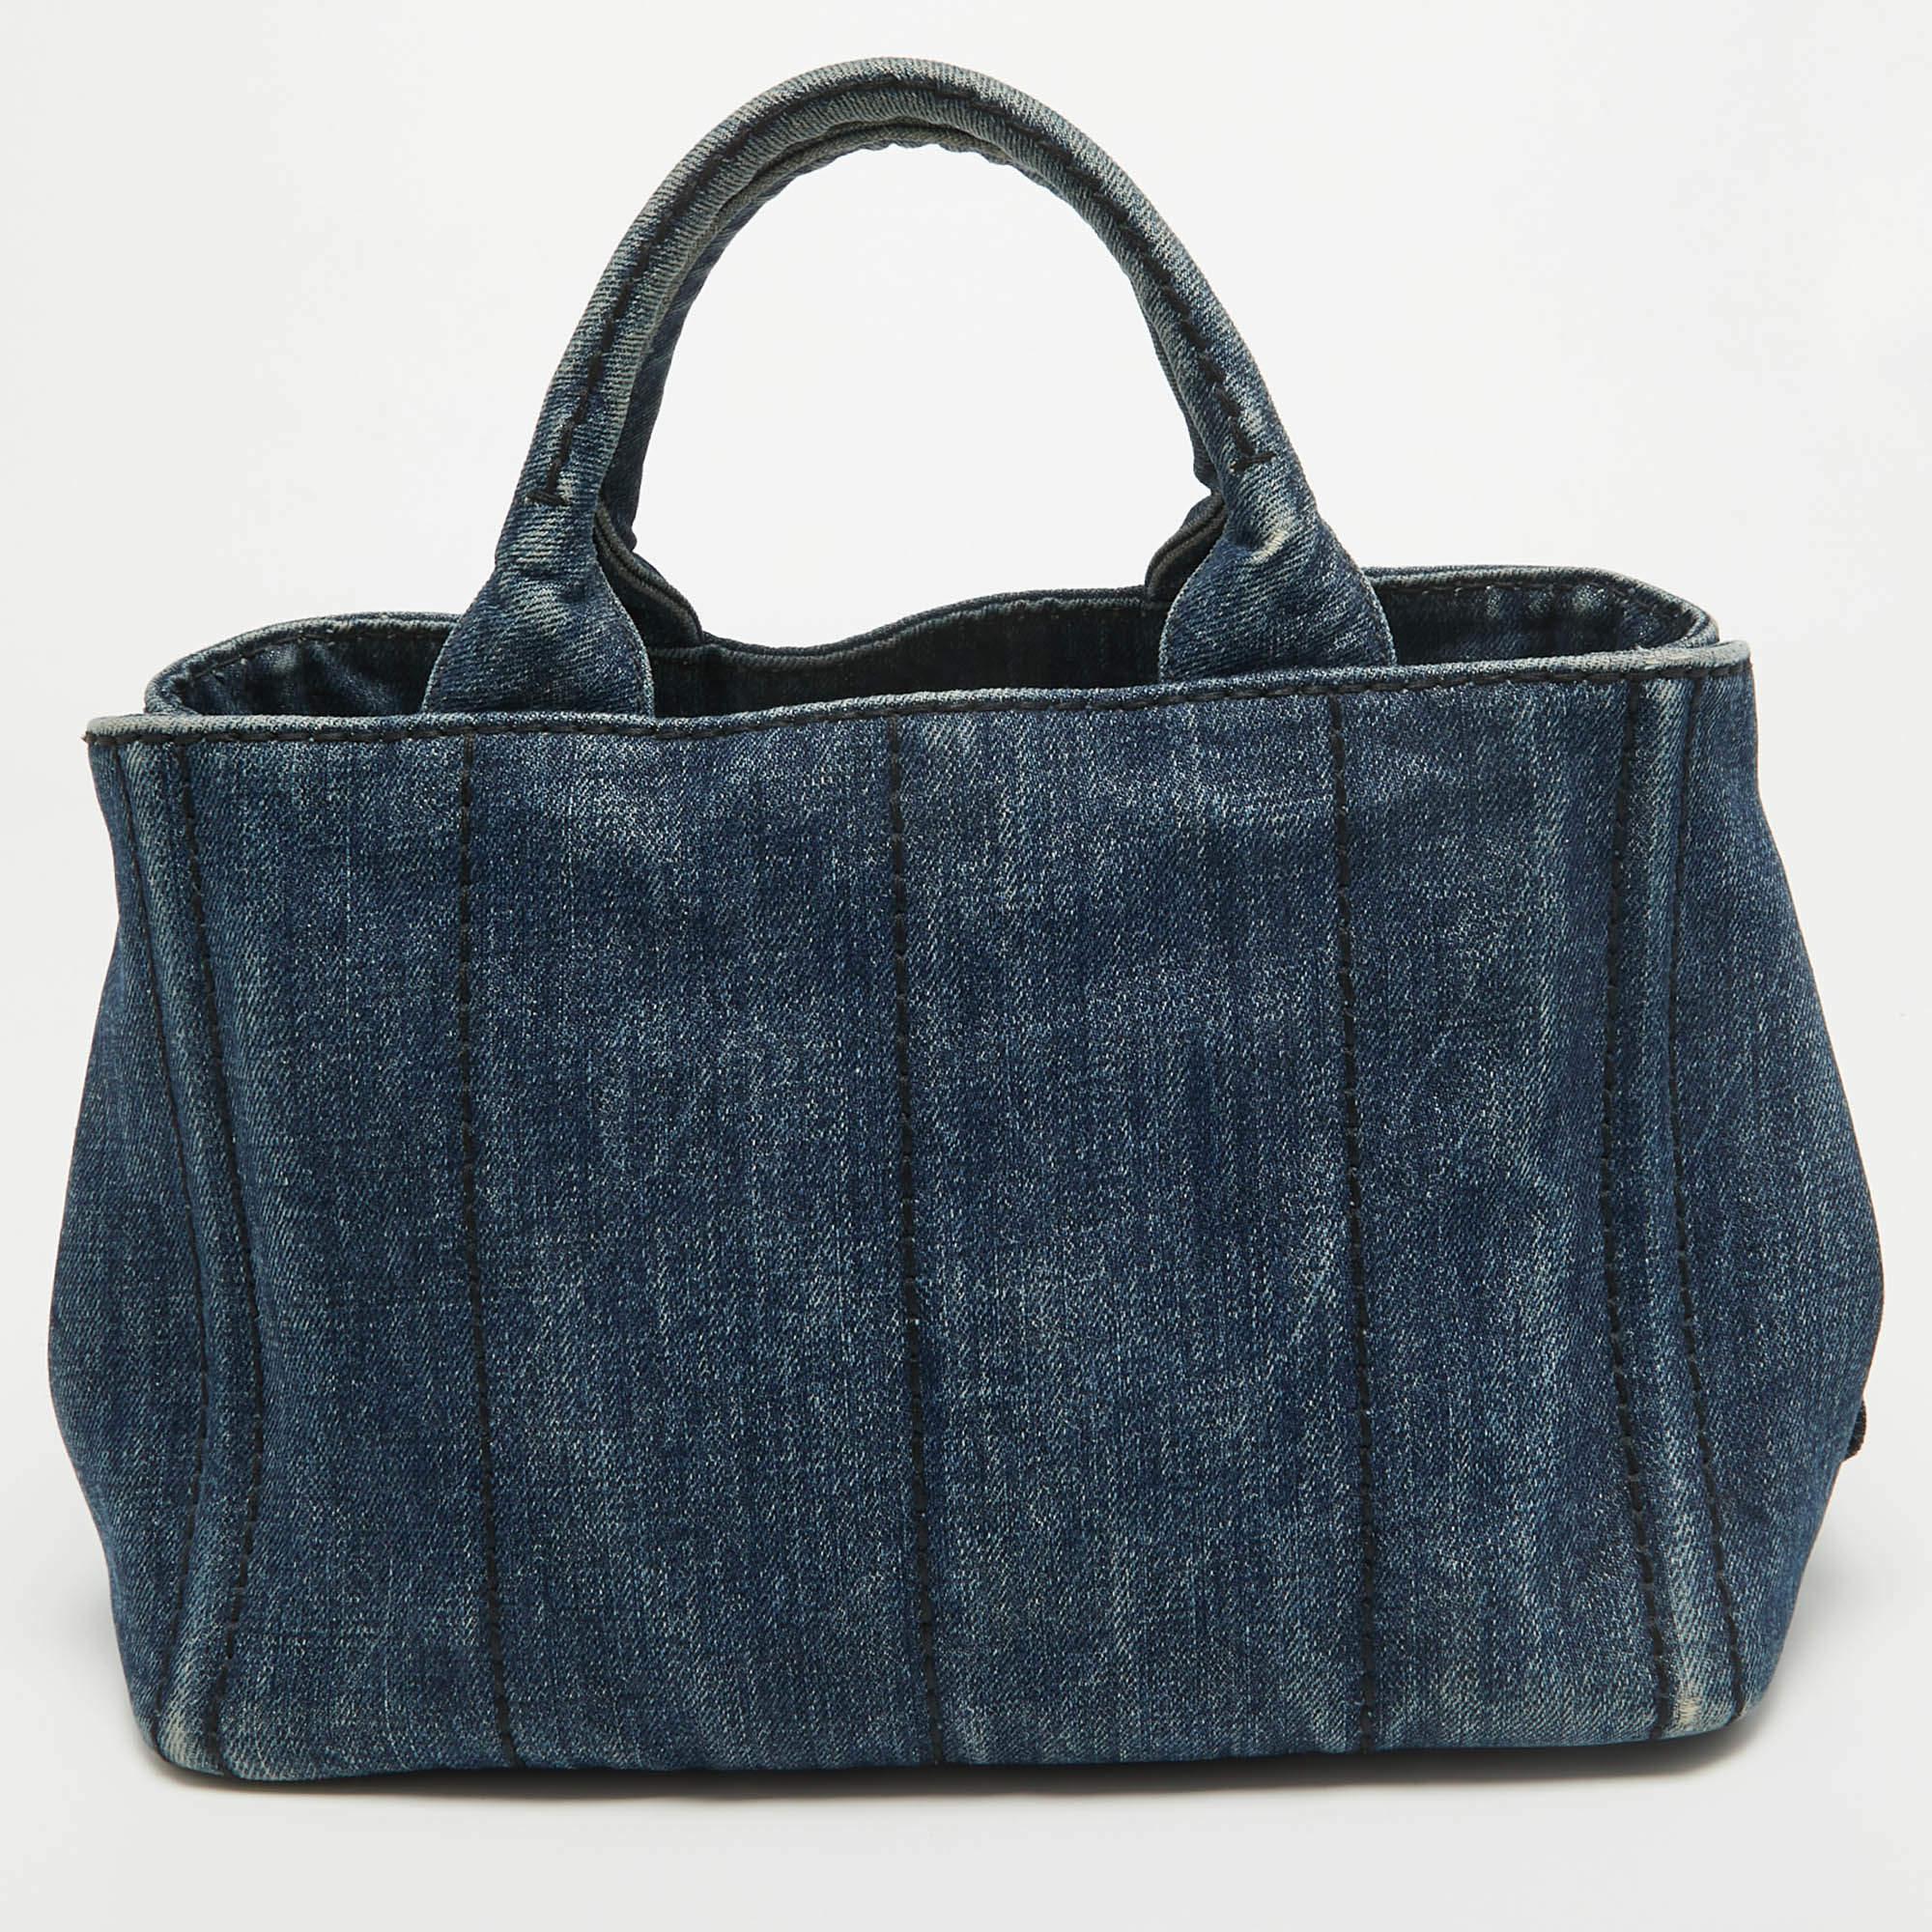 This alluring tote bag for women has been designed to assist you on any day. Convenient to carry and fashionably designed, the tote is cut with skill and sewn into a great shape. It is well-equipped to be a reliable accessory.

Includes: Detachable